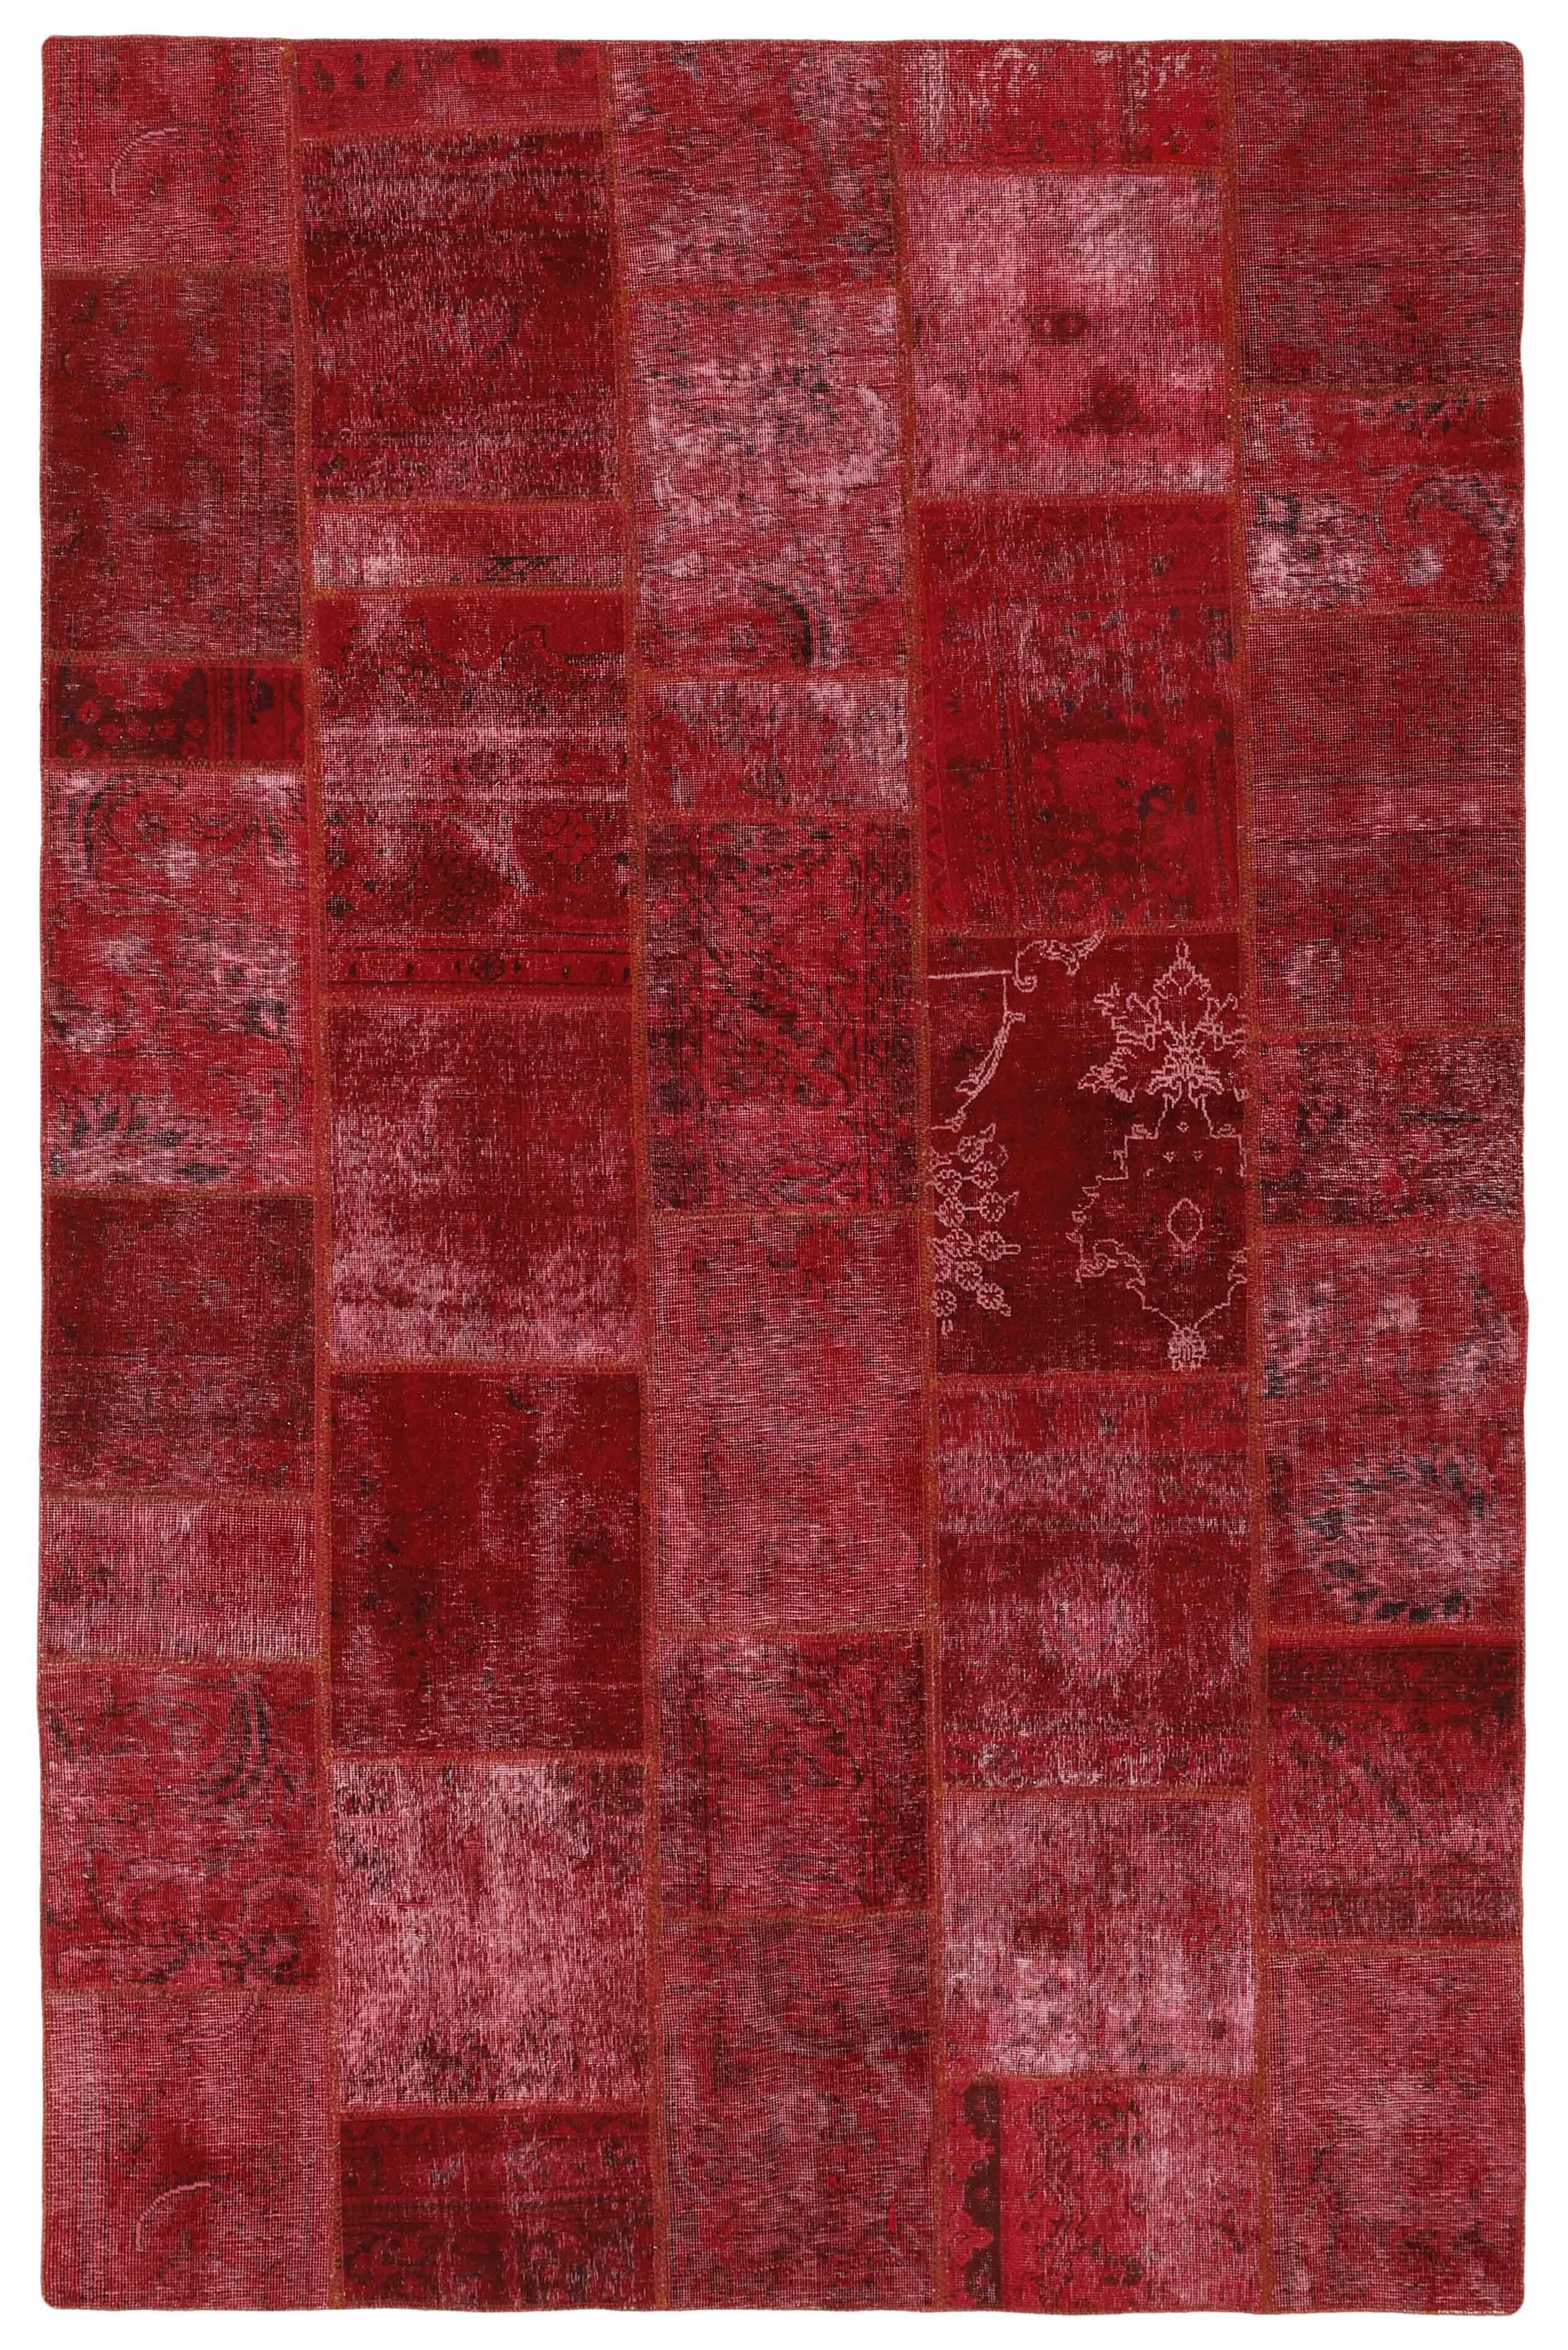 Authentic red patchwork persian rug